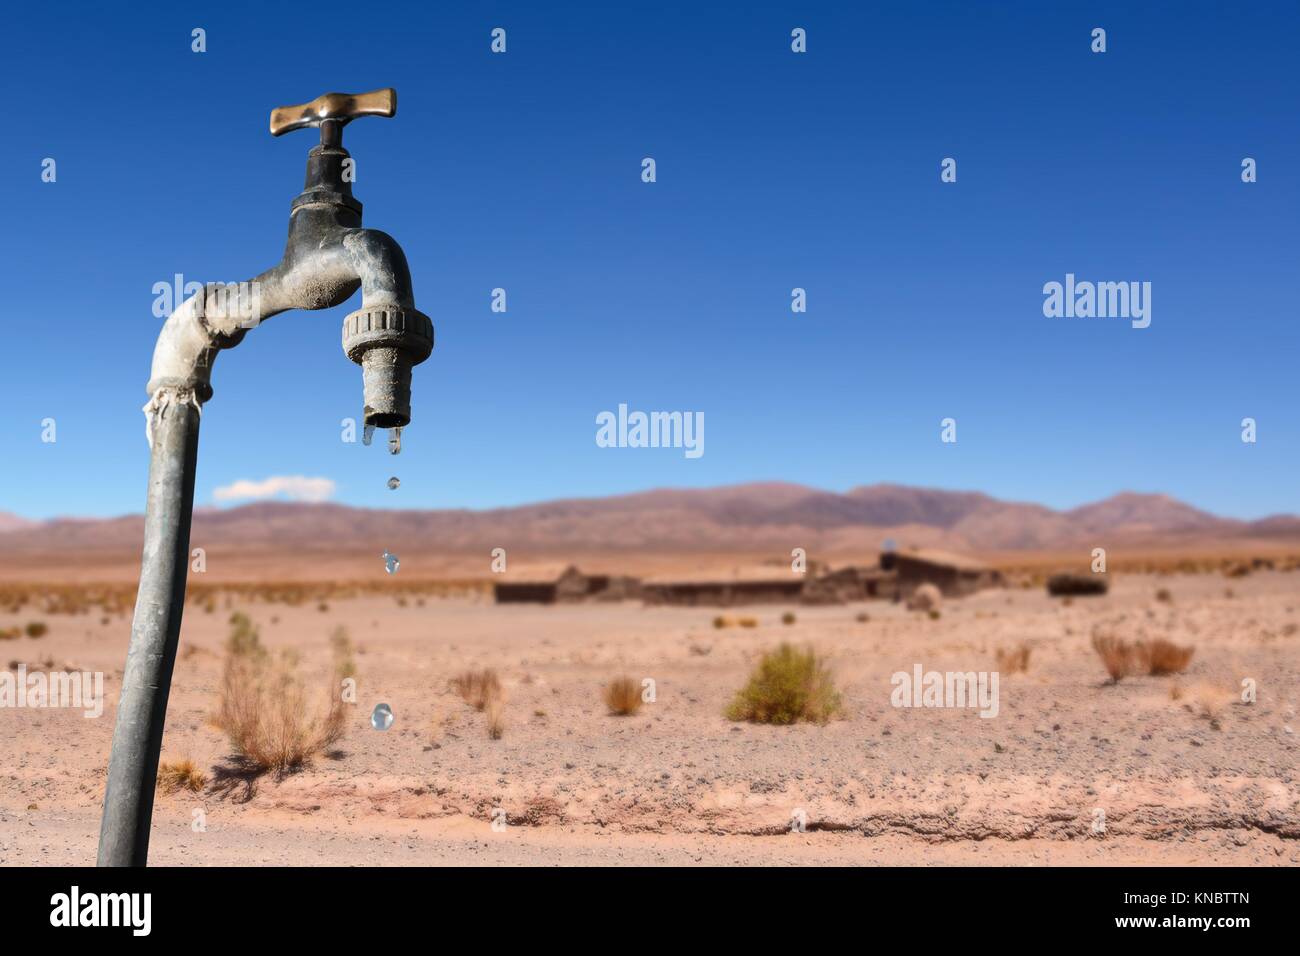 Drips faucet and dry environment in the background. Stock Photo